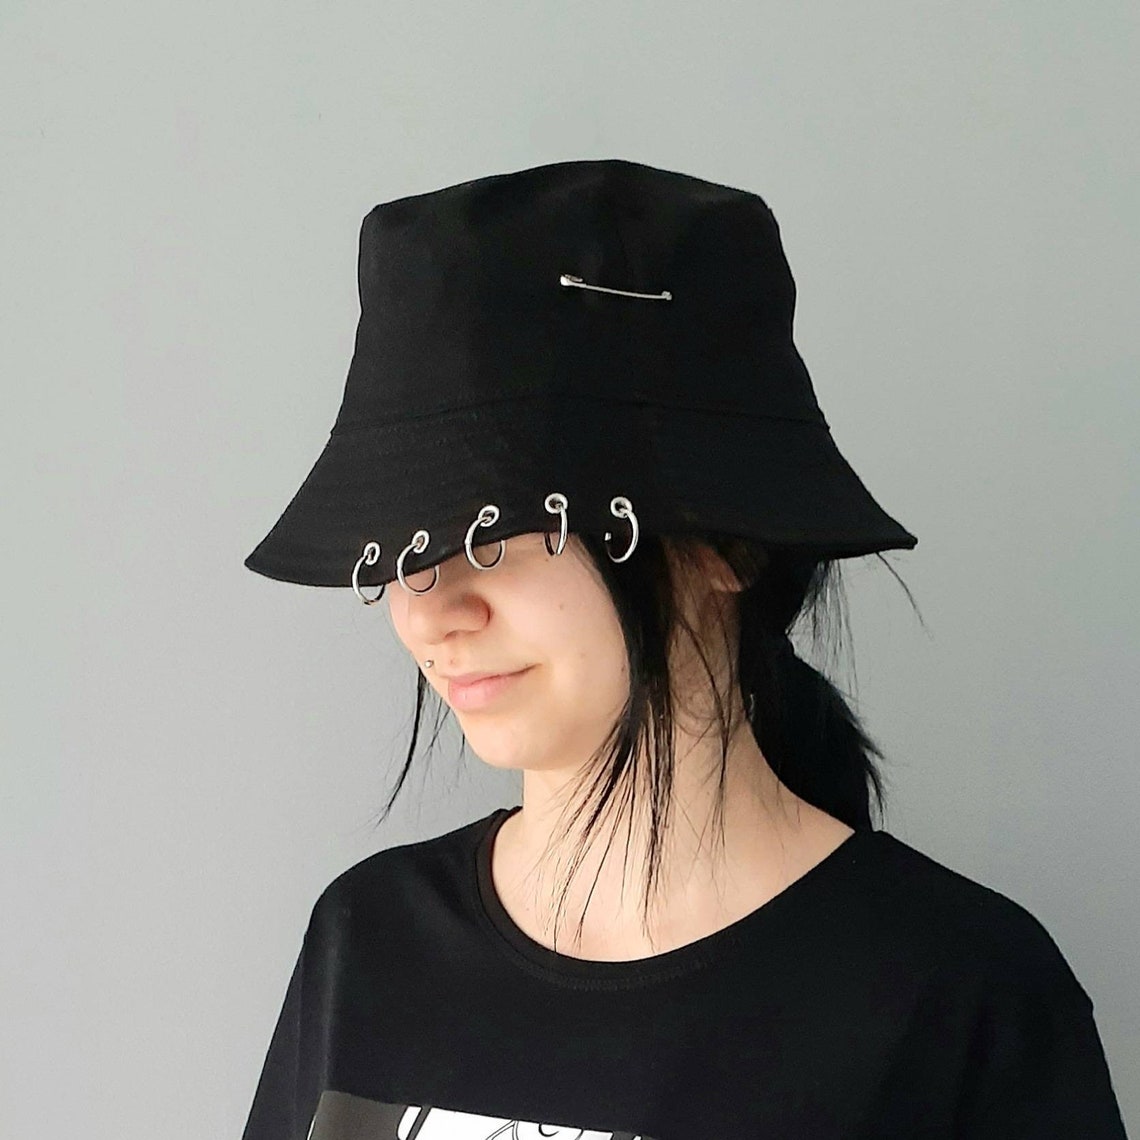 Kpop Bucket-Hat with RingsPiercing Ring Bucket Grunge | Etsy